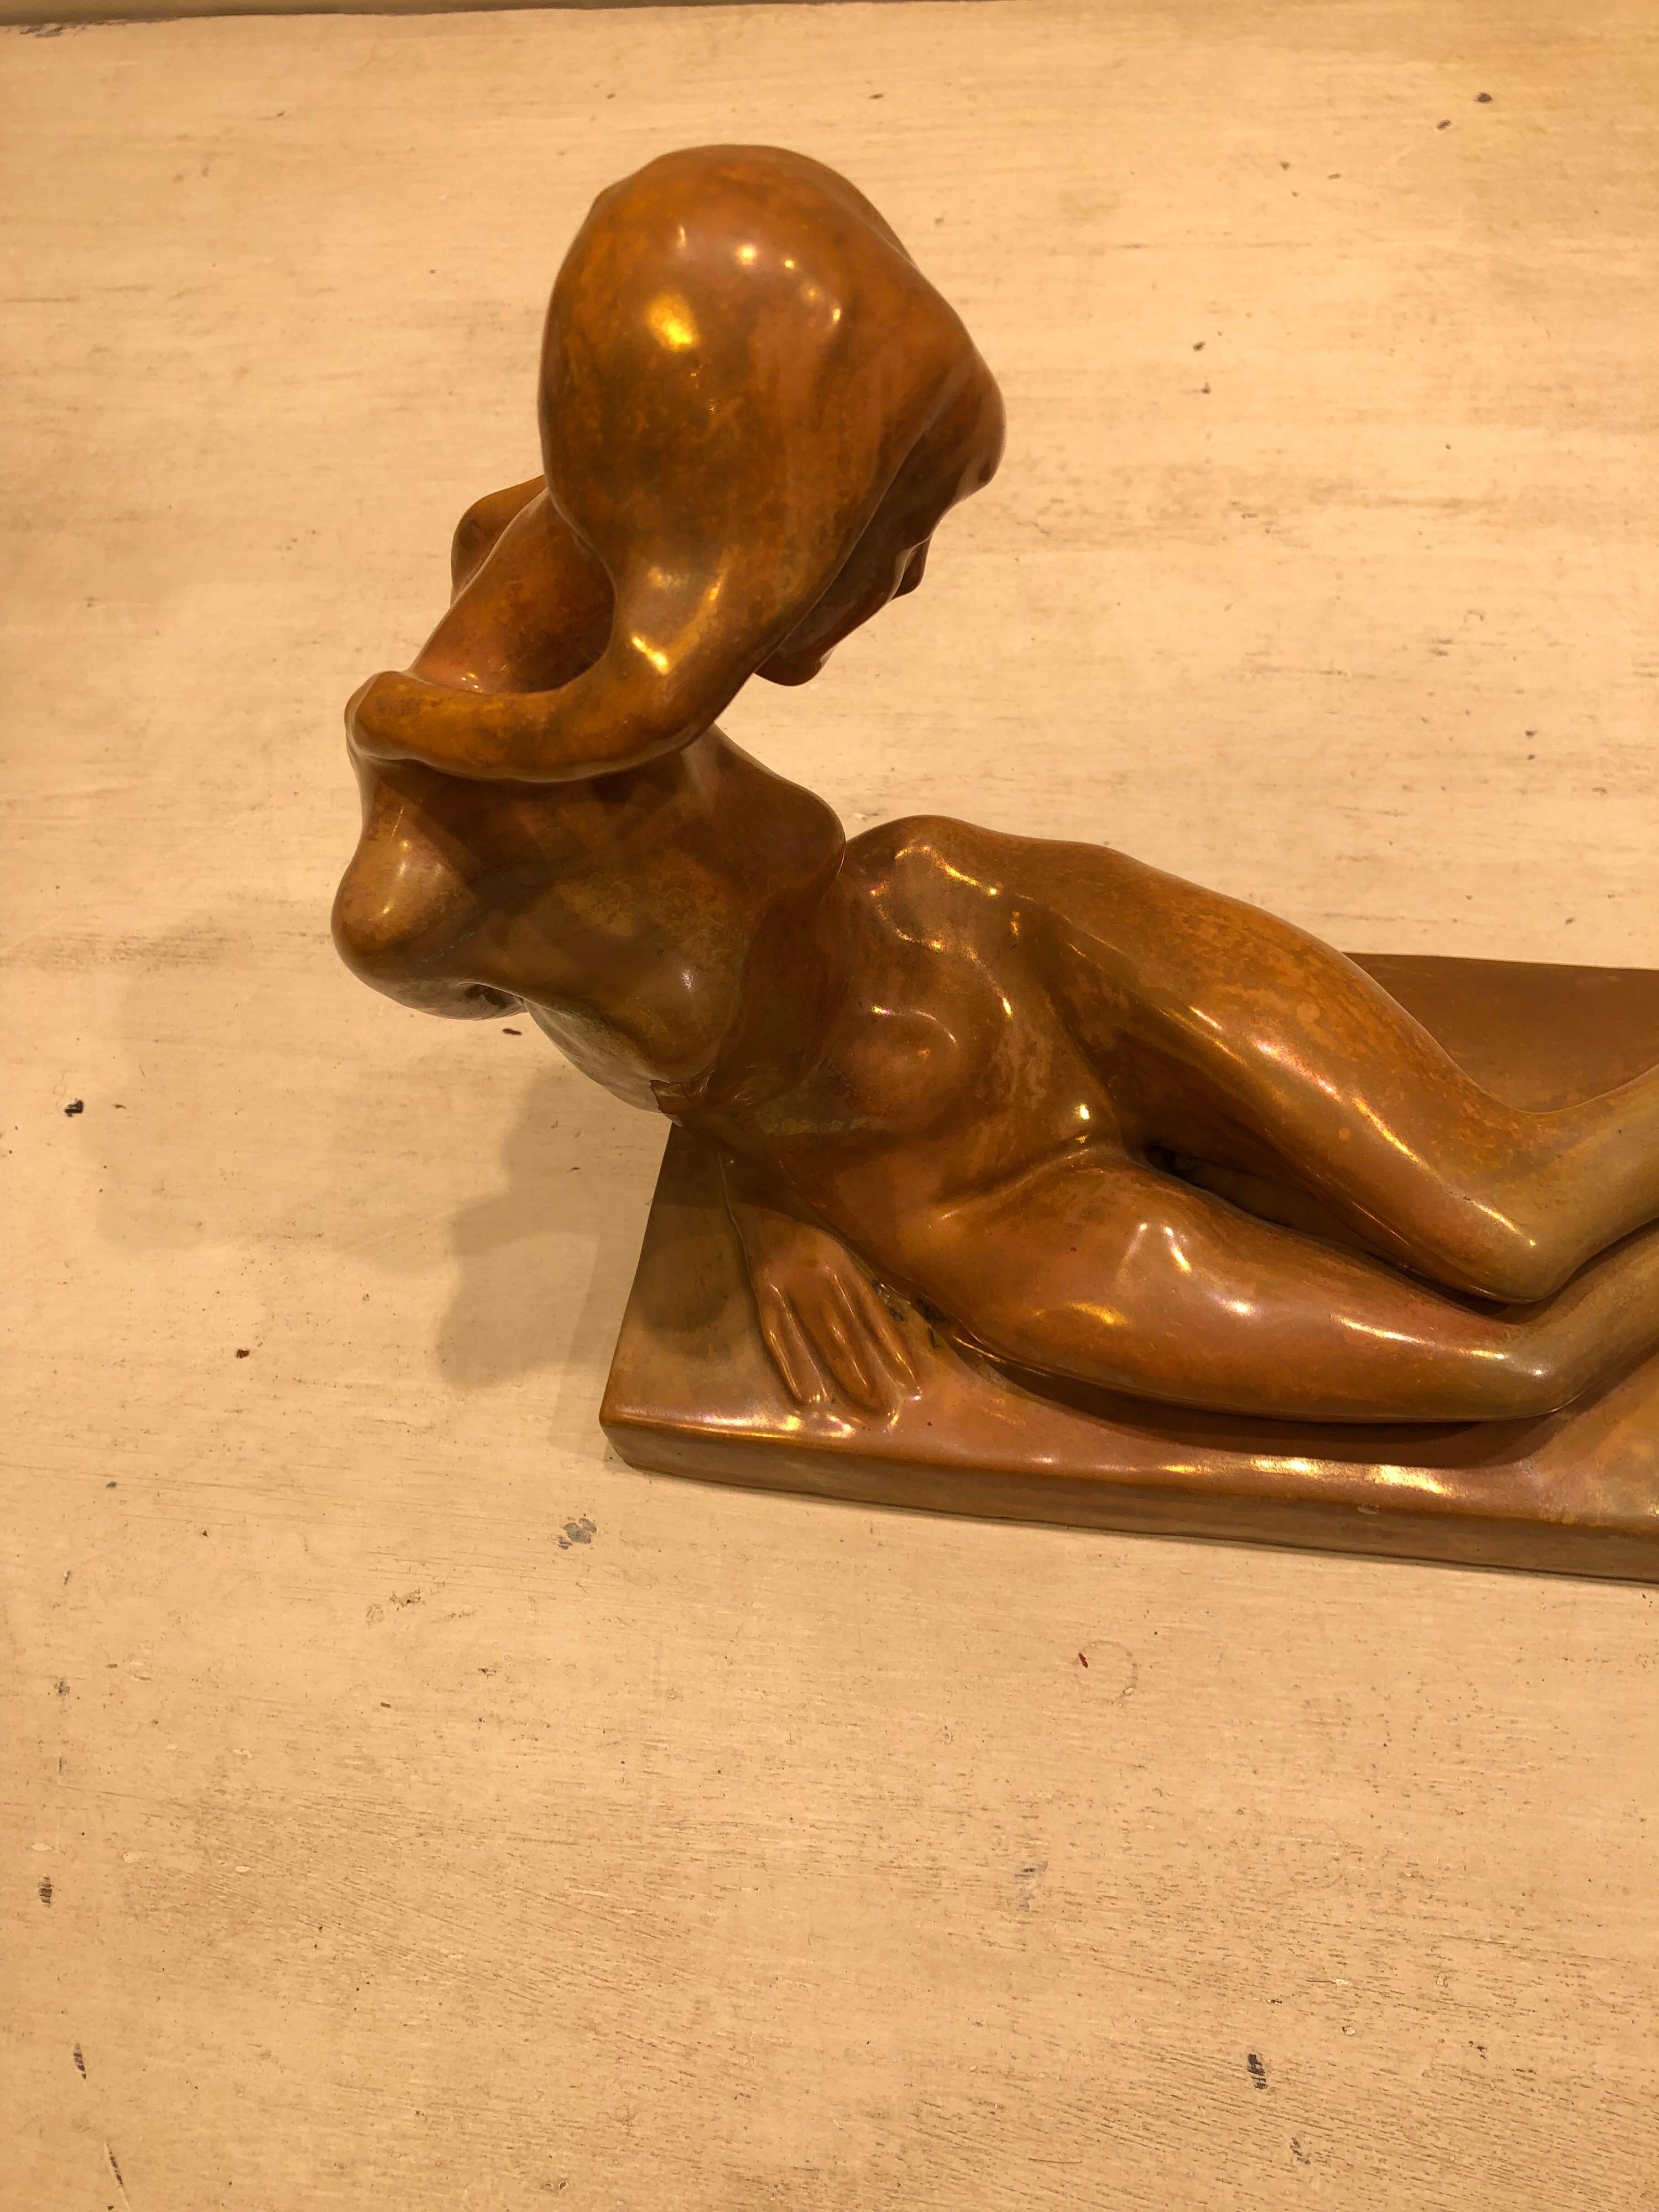 A beautiful ceramic sculpture with a gold/bronze irridescent finish of a reclining nude lady by the Italian artist Enrico Mazzolani. This piece is signed and in excellent condition.